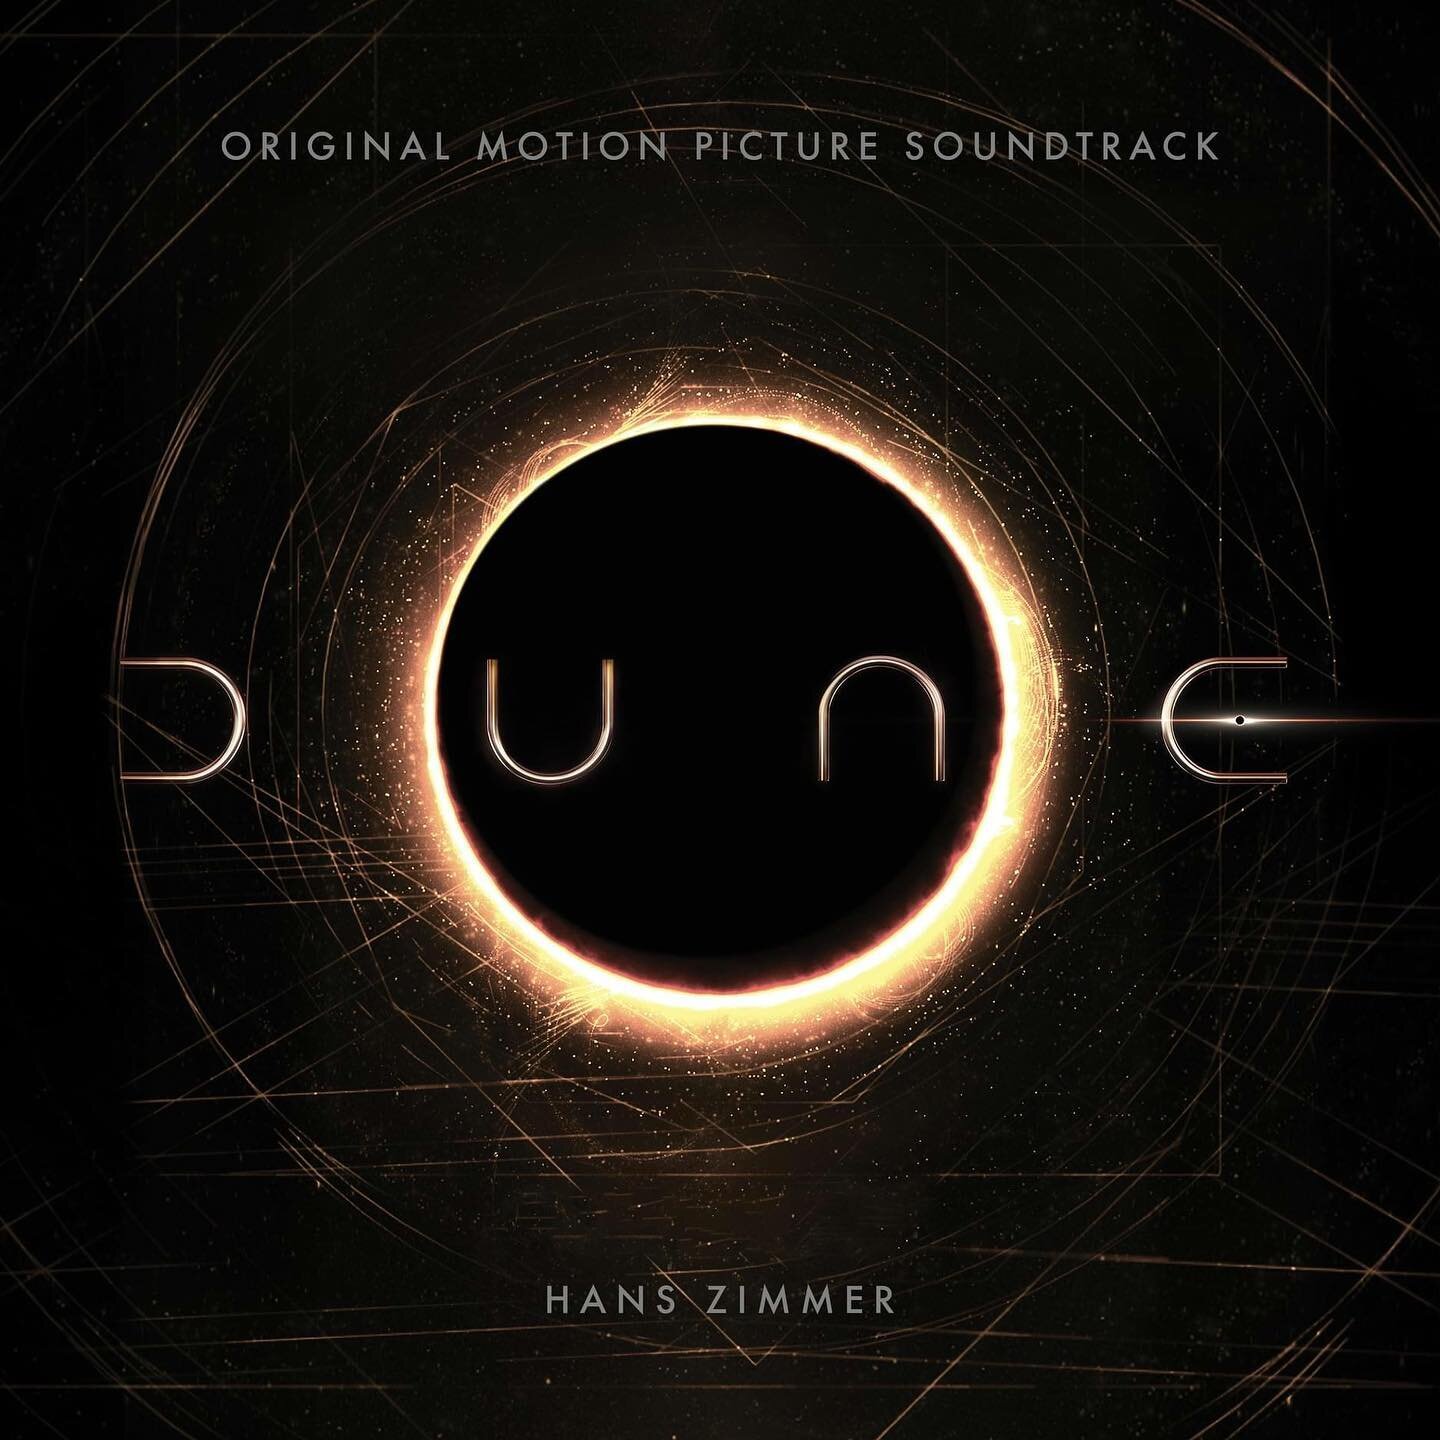 So excited to finally share that I&rsquo;m a featured vocalist on the @dunemovie score. This is hands down the most exciting project I&rsquo;ve ever worked on and I&rsquo;m grateful to @hanszimmer for having me along for the journey. I can&rsquo;t wa